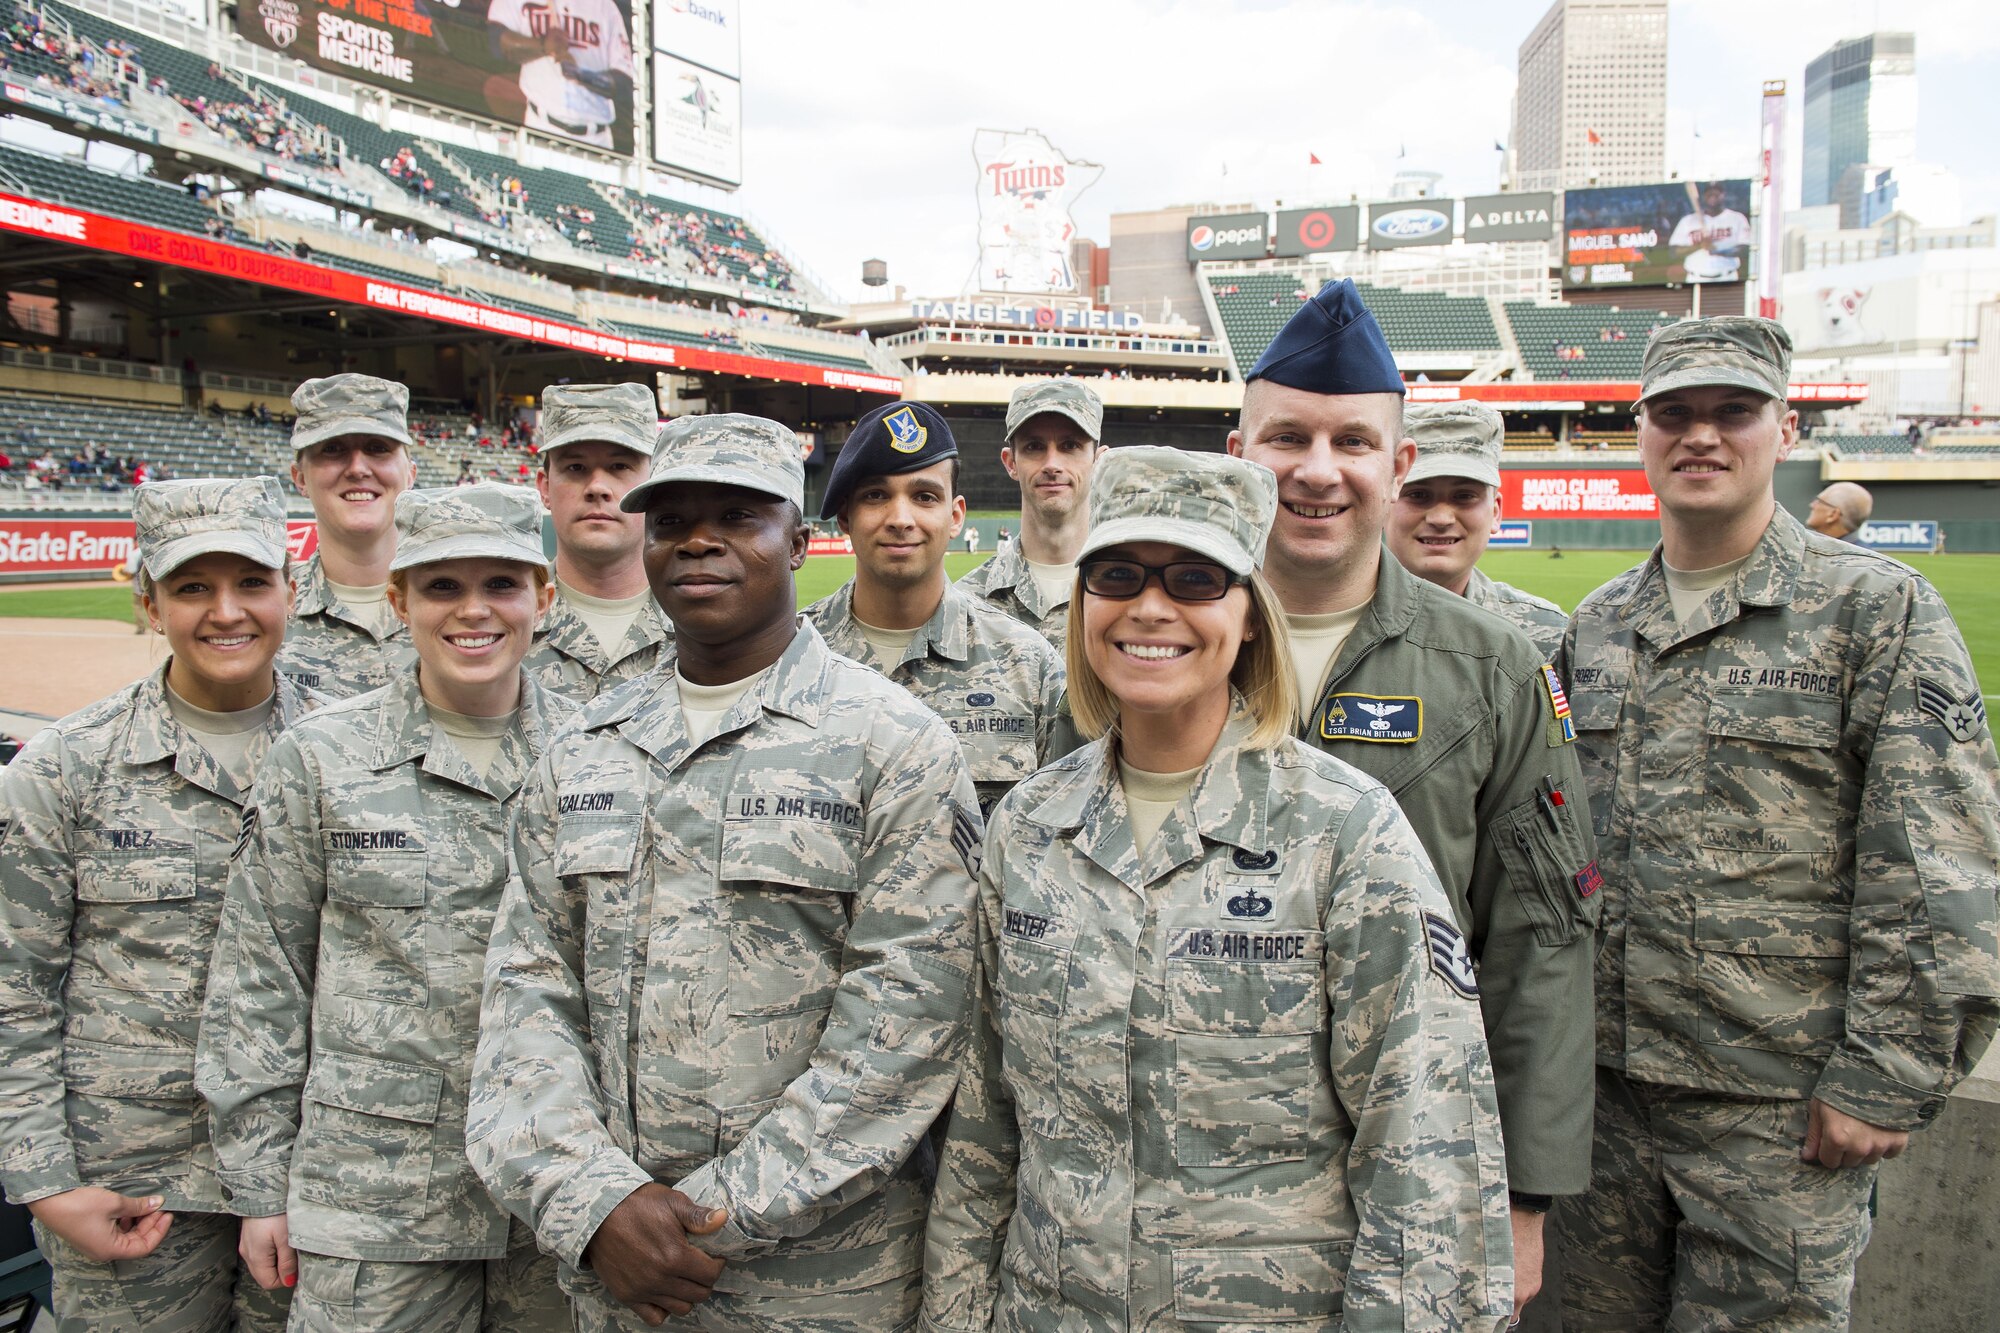 Outstanding airmen from the 133rd Airlift Wing were recognized before a Minnesota Twins home game at Target Field in Minneapolis, Minn., May 2, 2017.